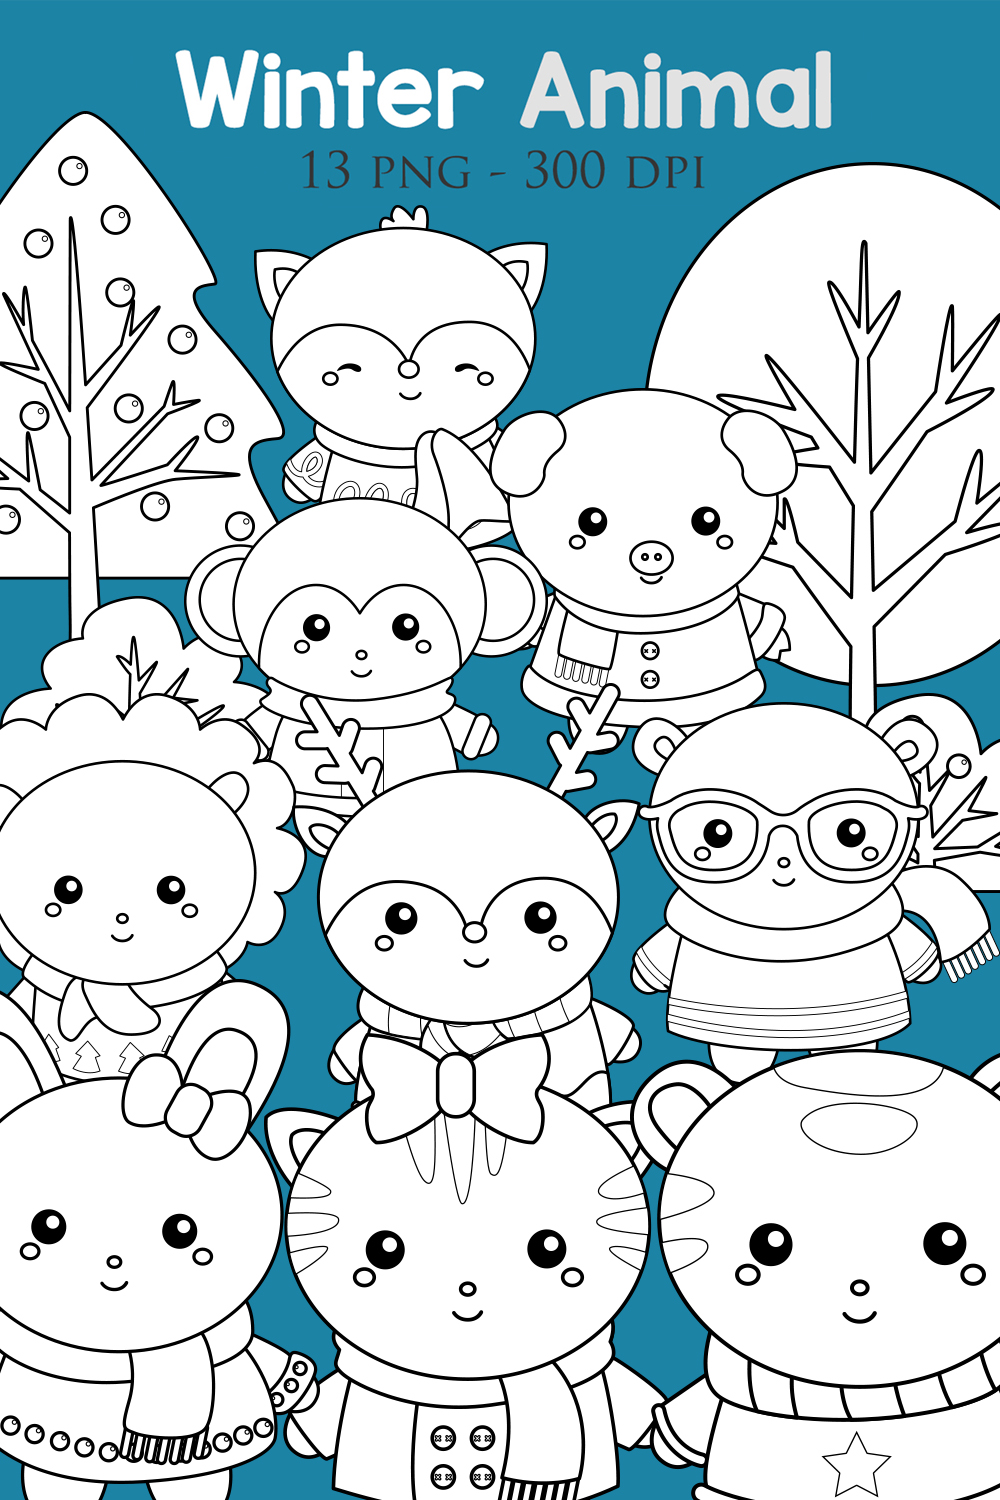 Cute and Funny Winter Animal Holiday Season Christmas Nature Monkey Rabbit Raindeer Tiger Cat Squirrel Fox Bear Cartoon Digital Stamp Outline pinterest preview image.